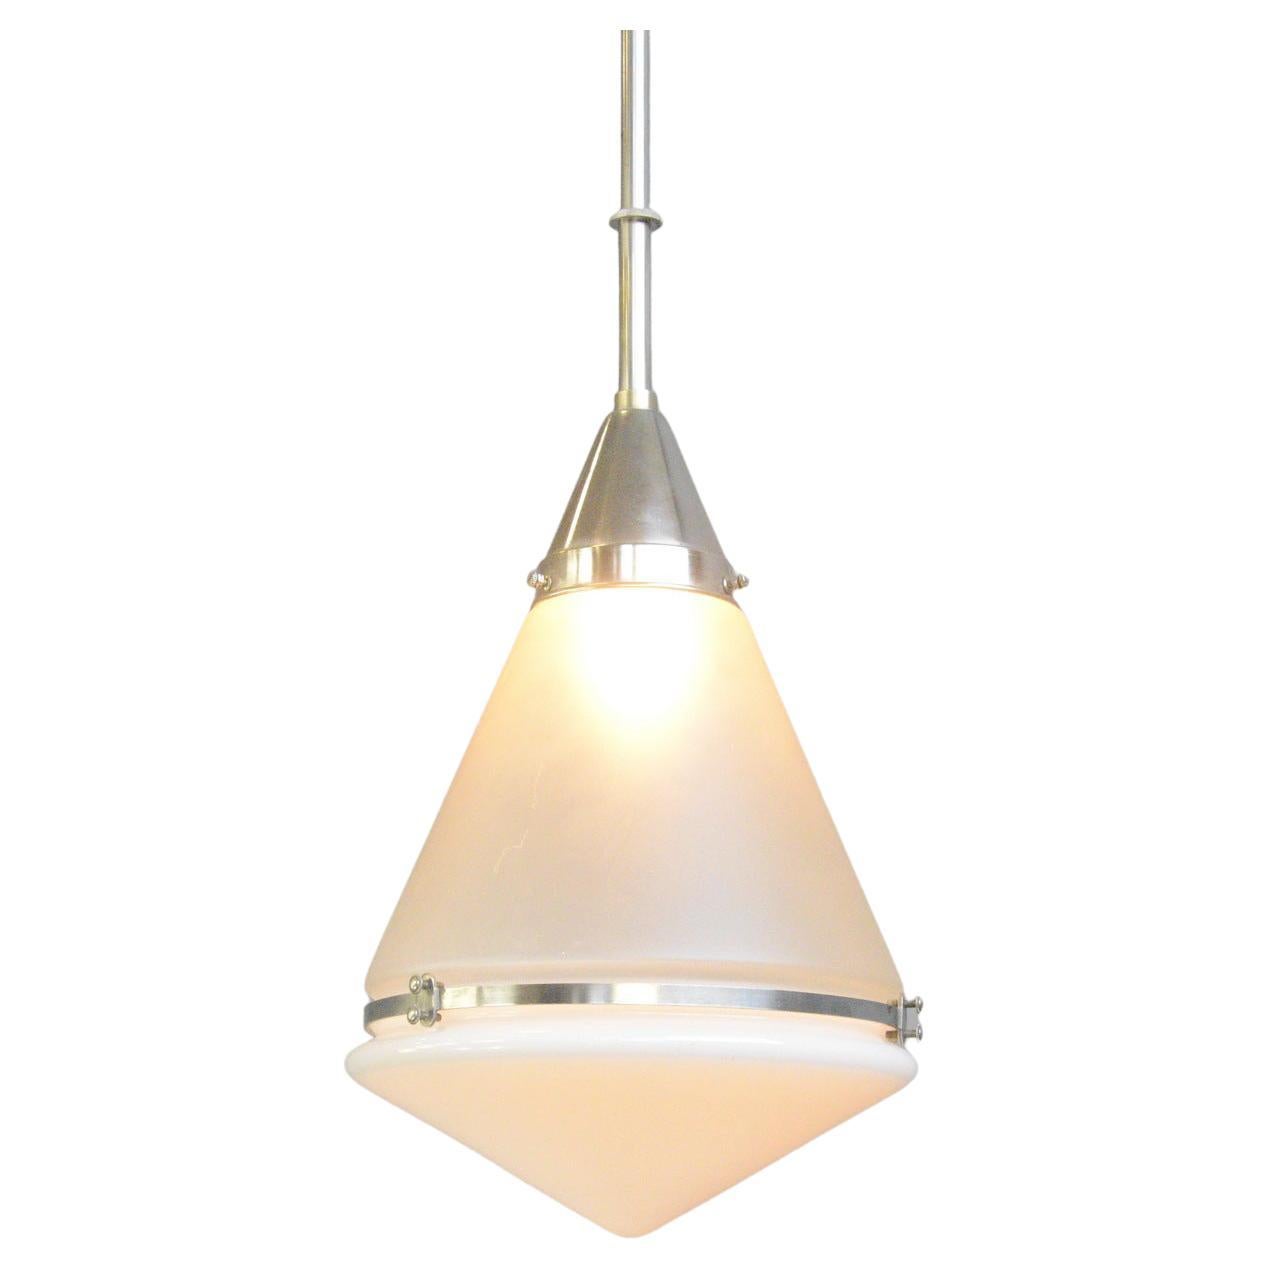 Luzette Pendant Light by Peter Behrens for Siemens circa 1920s For Sale